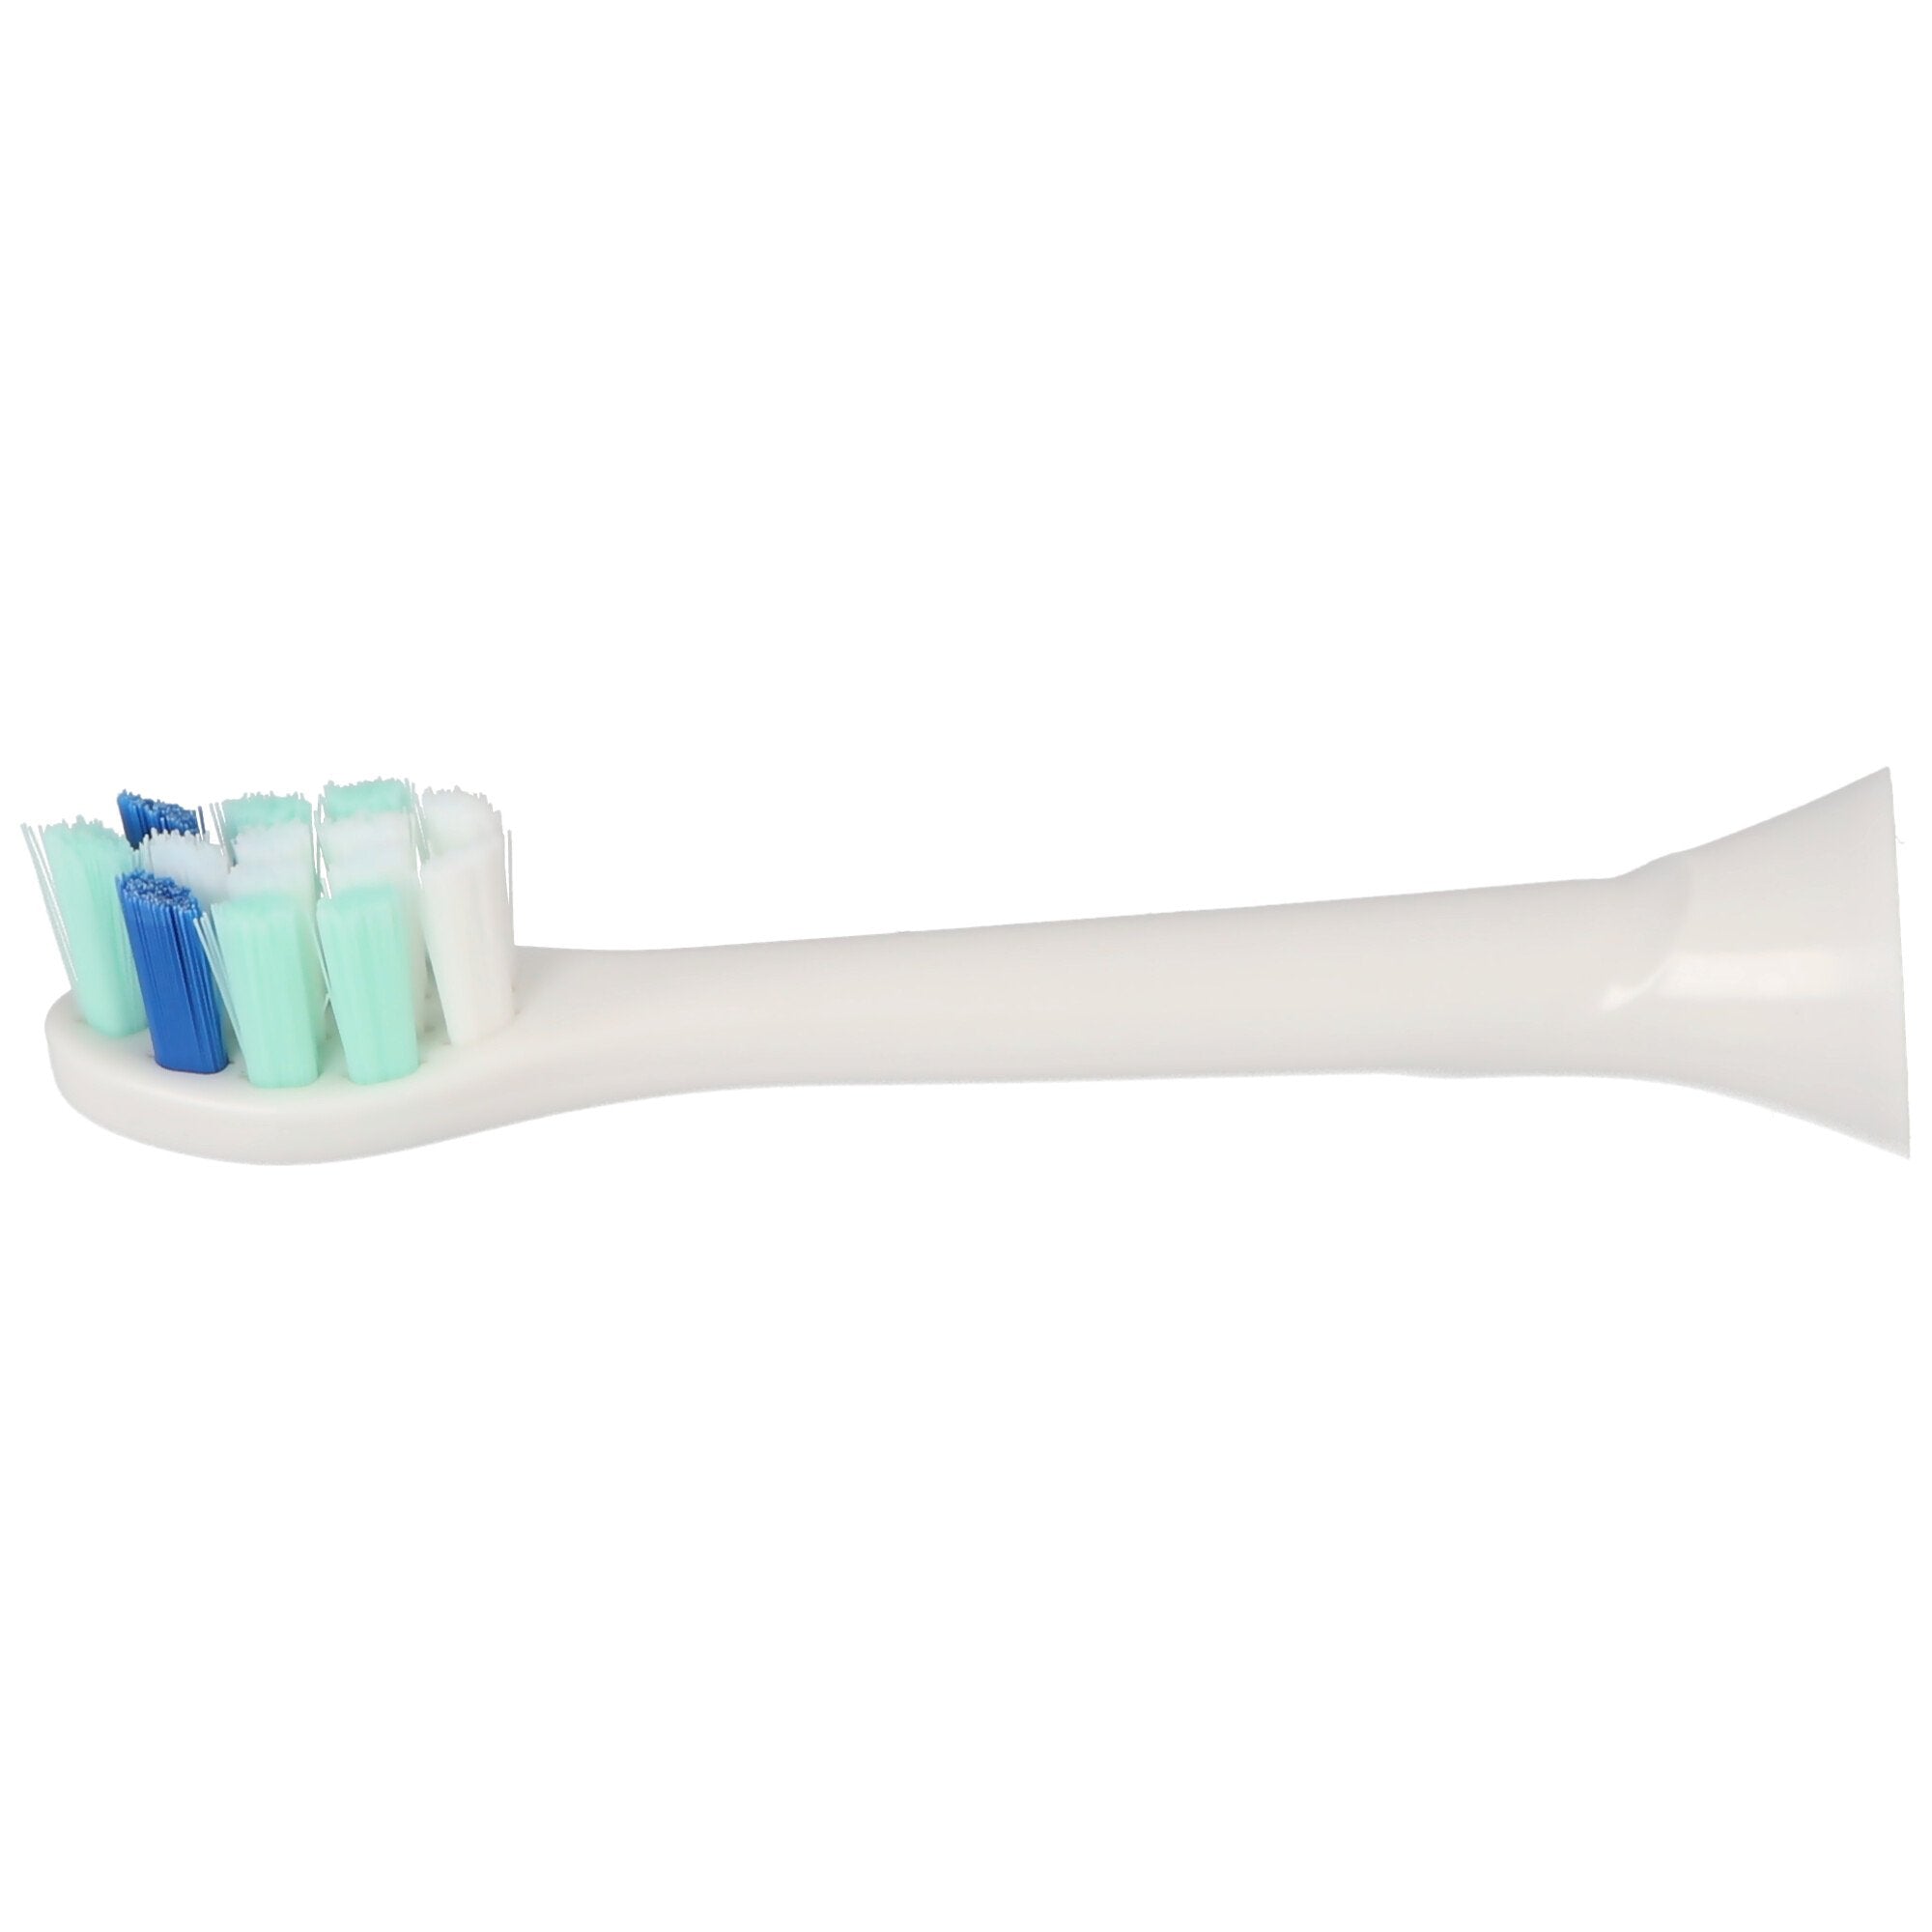 Pack of 4 Gum Care Cleaning Brush replacement toothbrush heads for electric toothbrushes from Philip